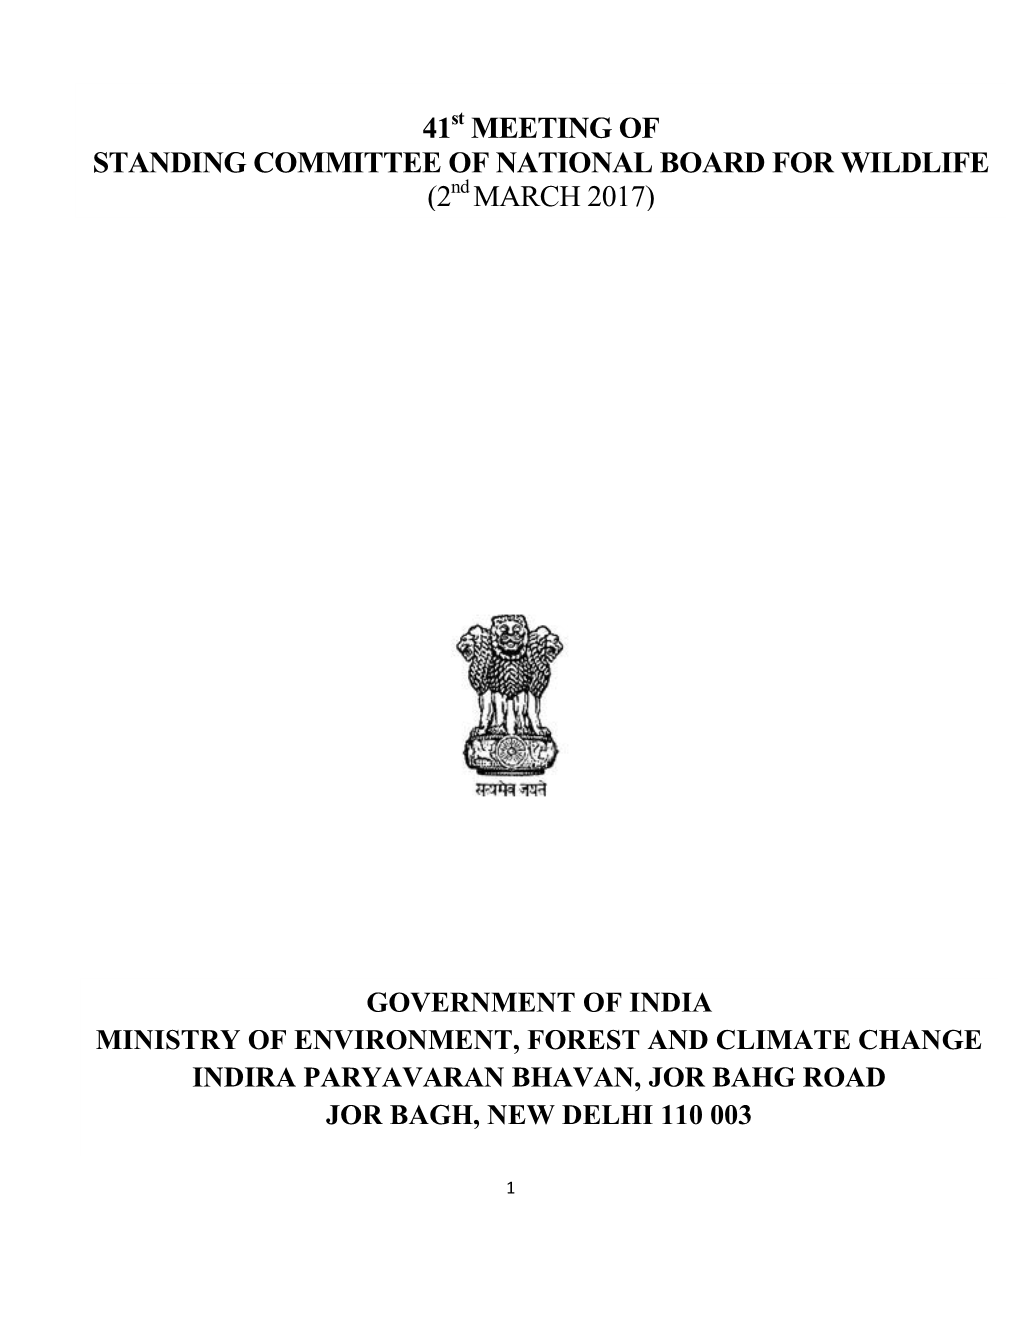 MEETING of STANDING COMMITTEE of NATIONAL BOARD for WILDLIFE (2Nd MARCH 2017)